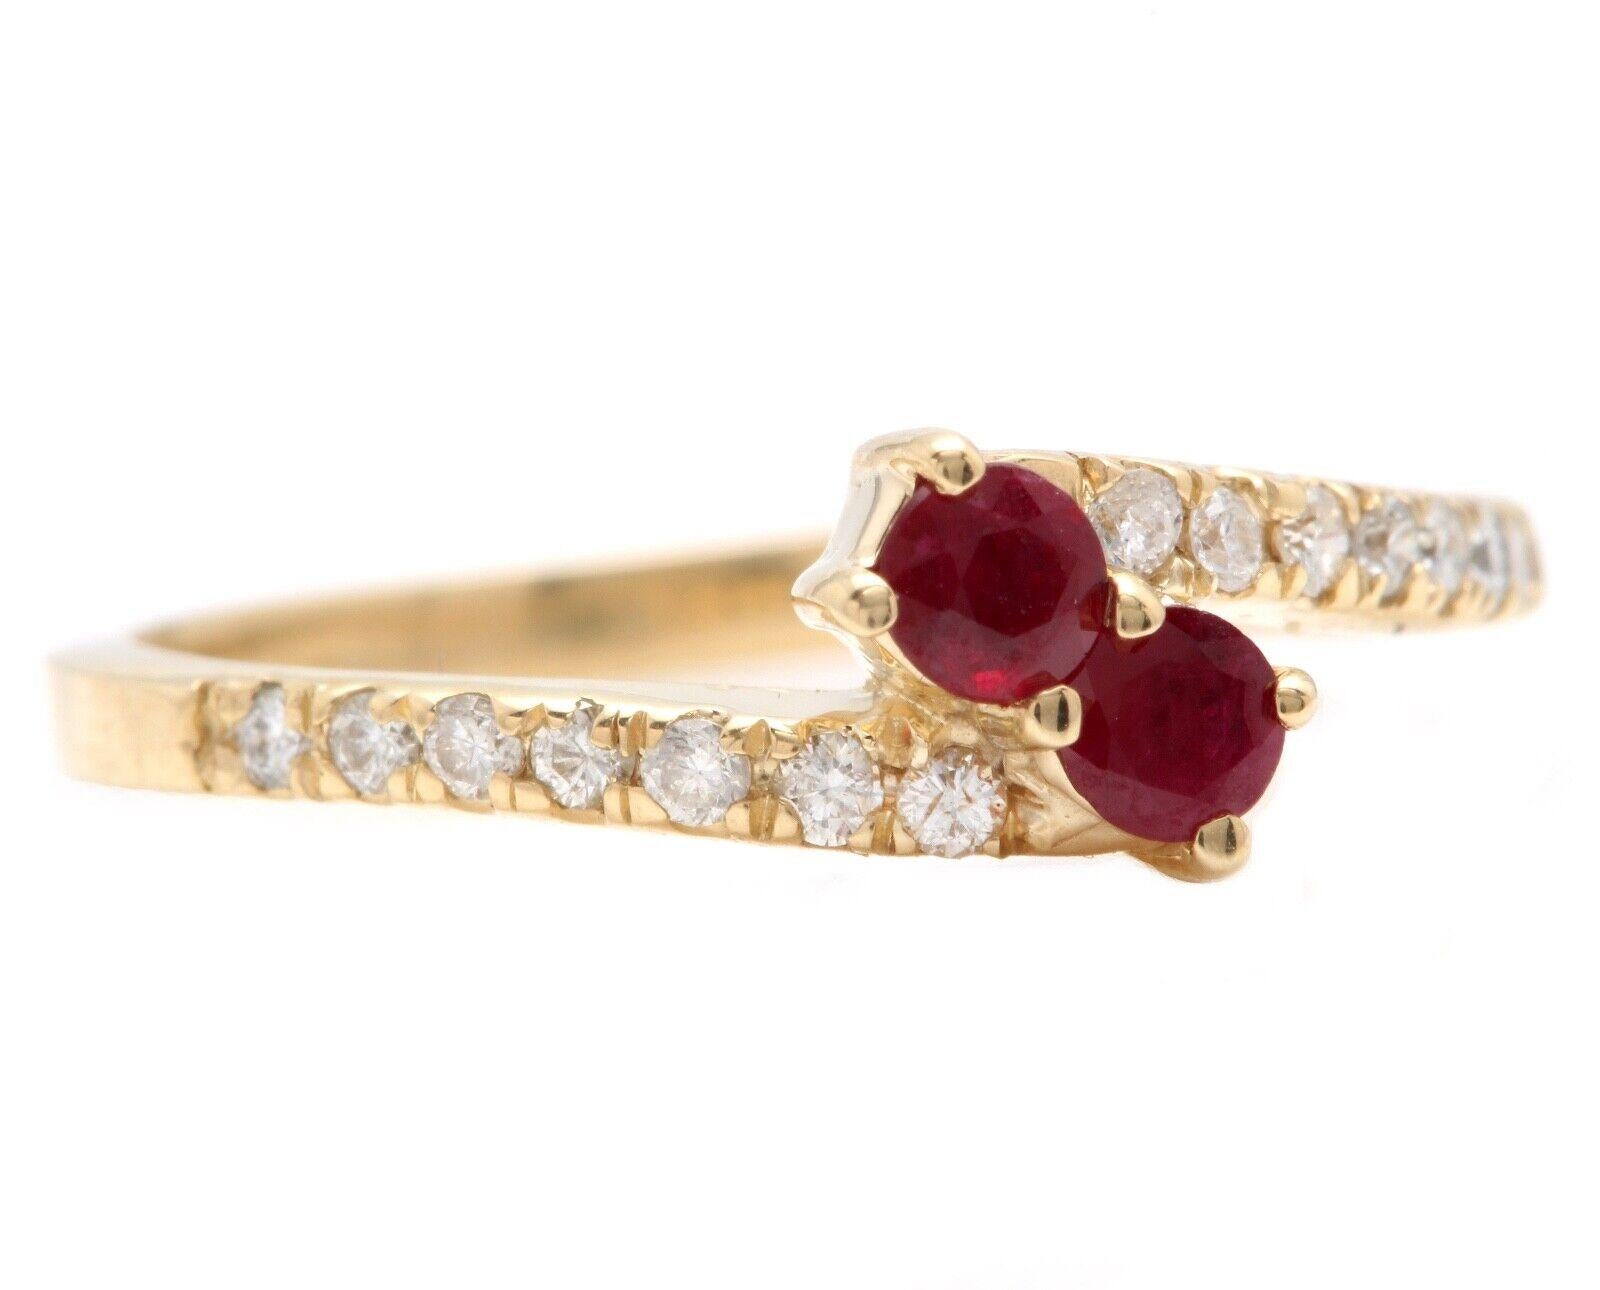 Impressive Natural Red Ruby and Diamond 14K Yellow Gold Ring

Suggested Replacement Value $2,000.00

Total Natural Round Cut Red Ruby Weight is: Approx. 0.25 Carats 
 
Natural Round Diamonds Weight: Approx. 0.15 Carats (color G-H / Clarity